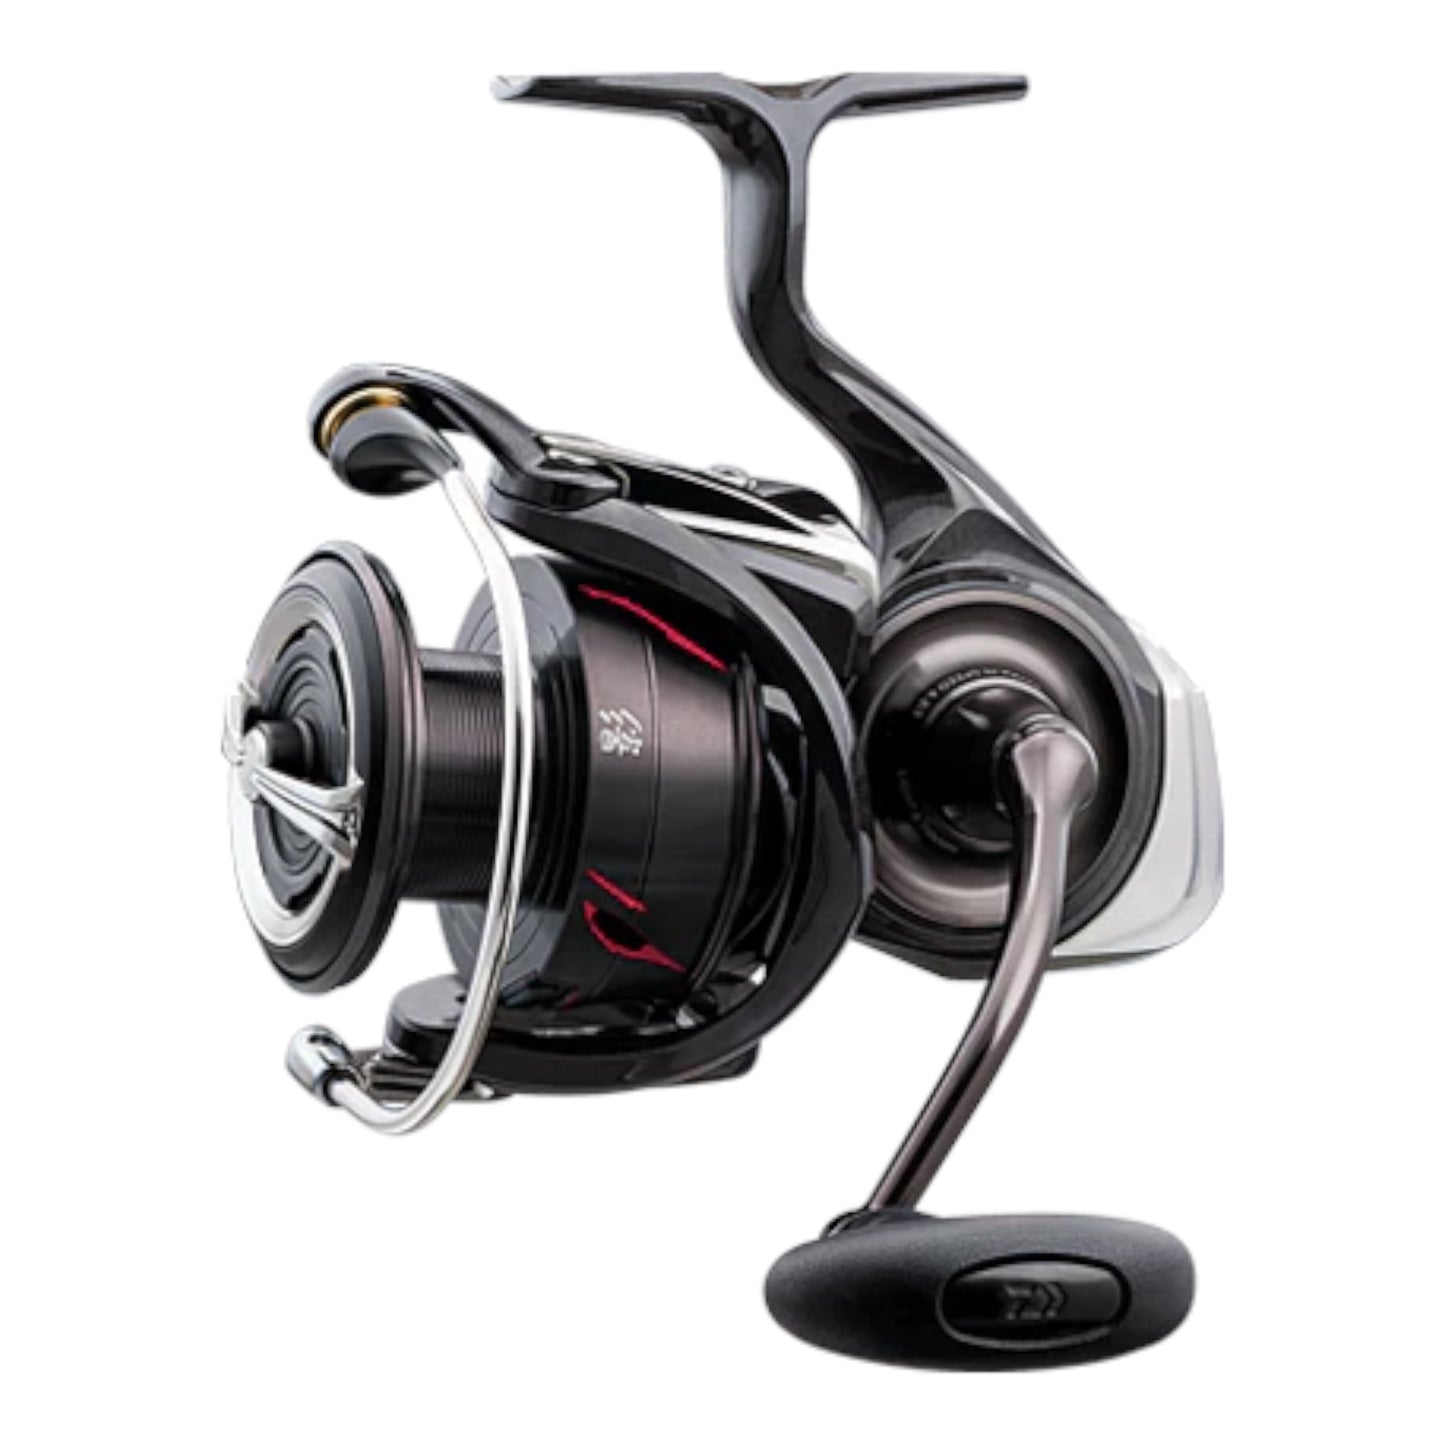 Daiwa Kage MQ Spinning Reel - IN STOCK (CALL FOR DETAILS)